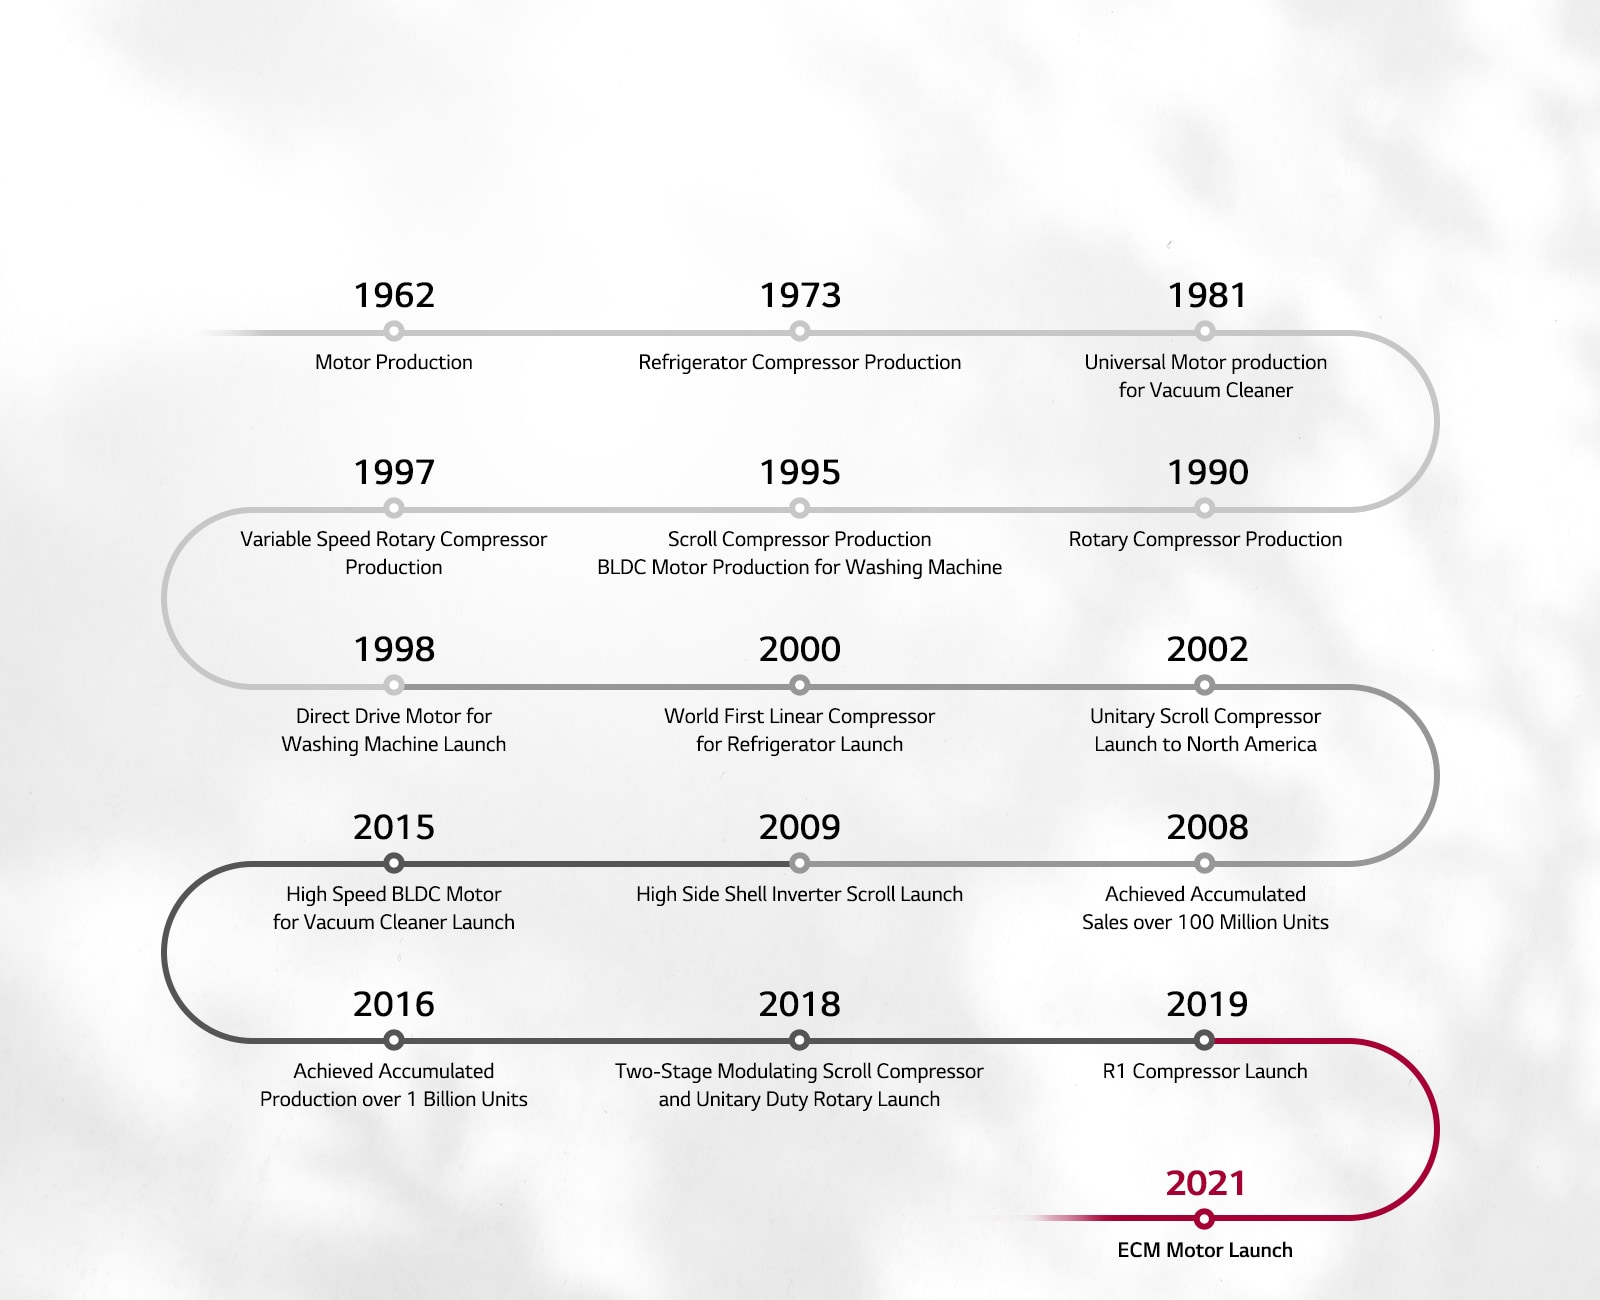 Introduction of History of LG Compressor and Motor Business by Year for 60 Years from 1962